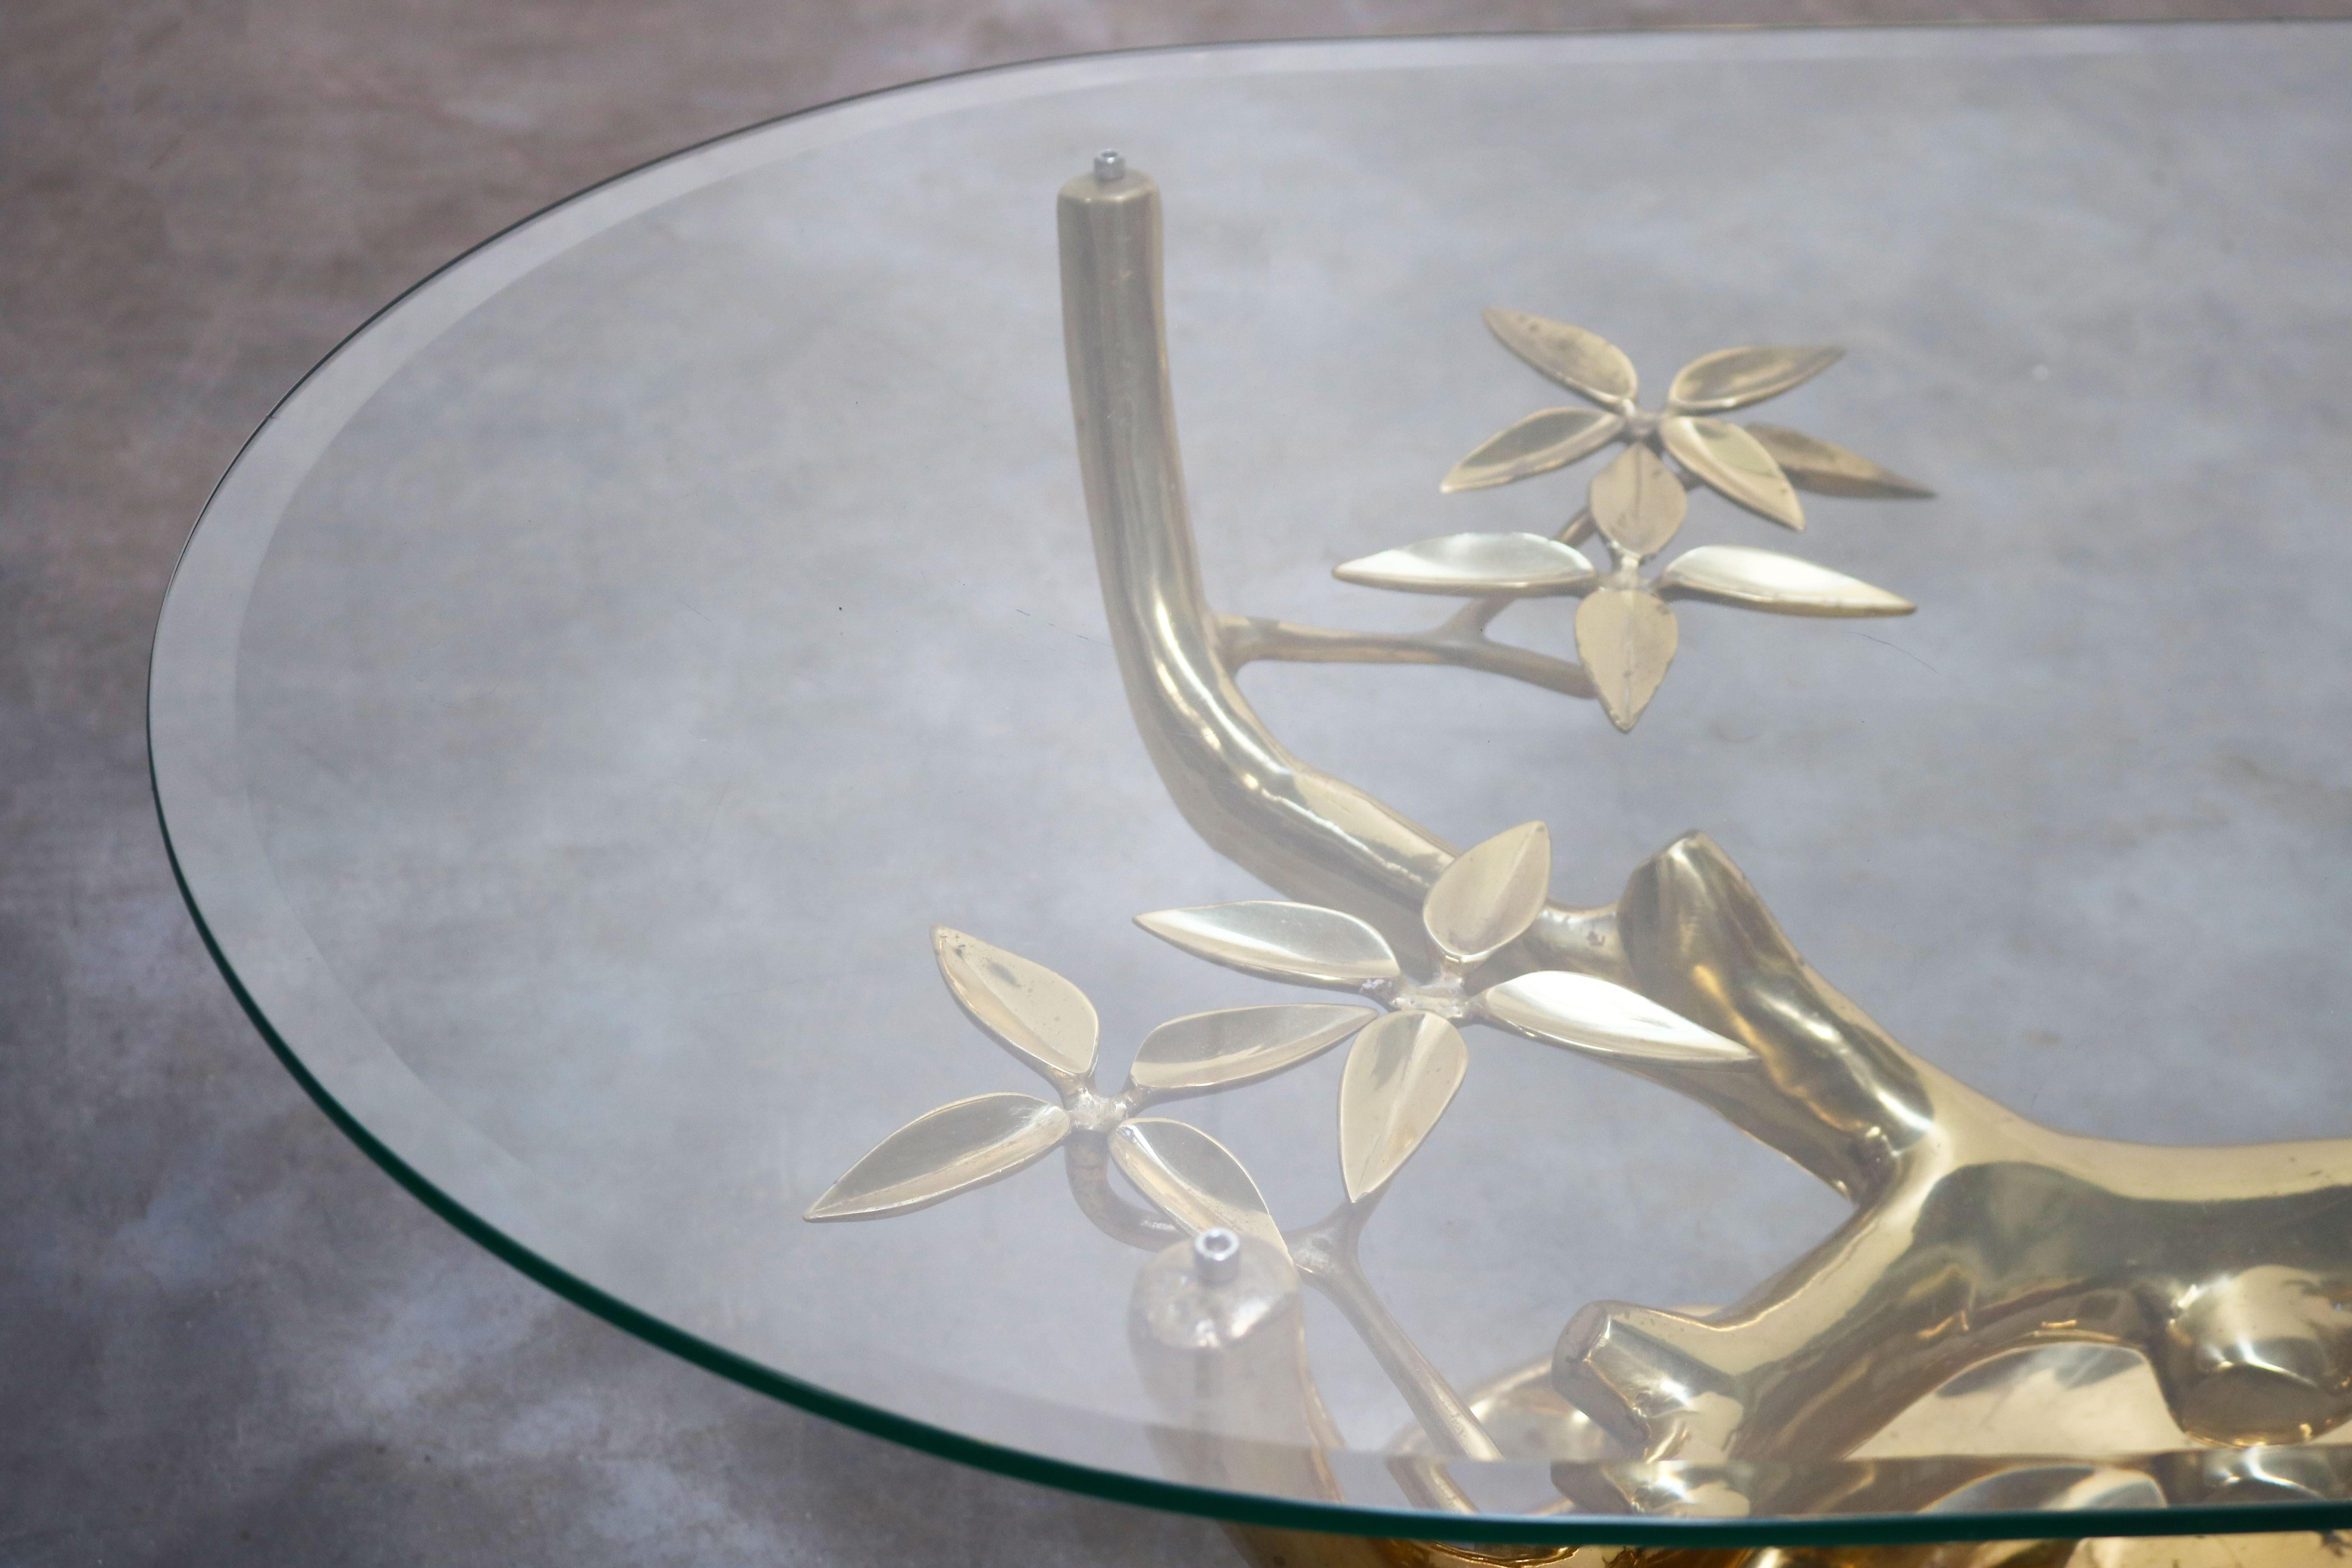 Mid-Century Modern Rare ''Bonsai'' Coffee Table in Brass by Willy Daro 1970s Belgium, Glass, Gold